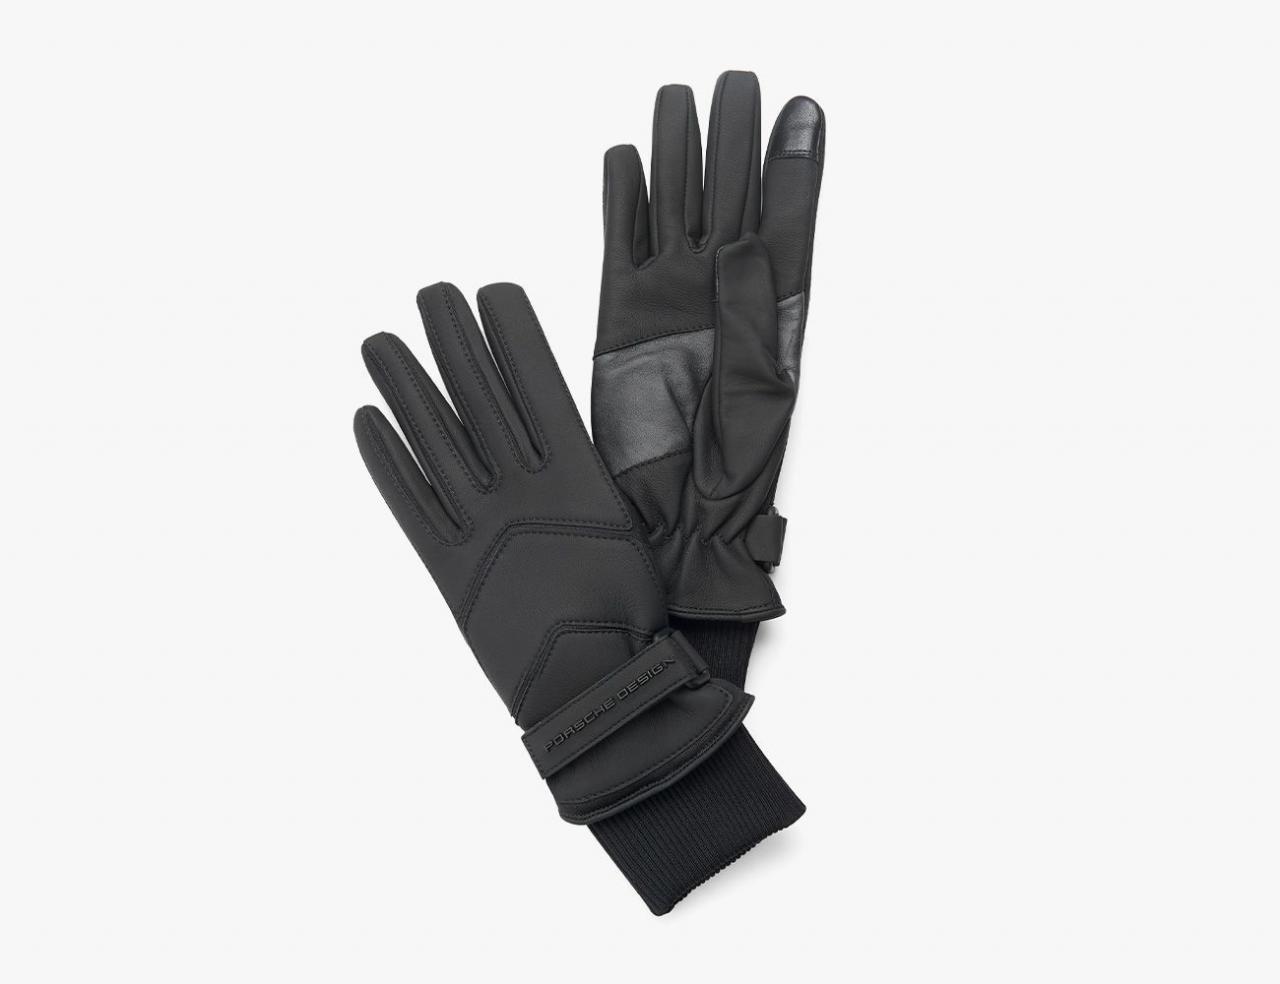 The Best Driving Gloves to Buy in 2021